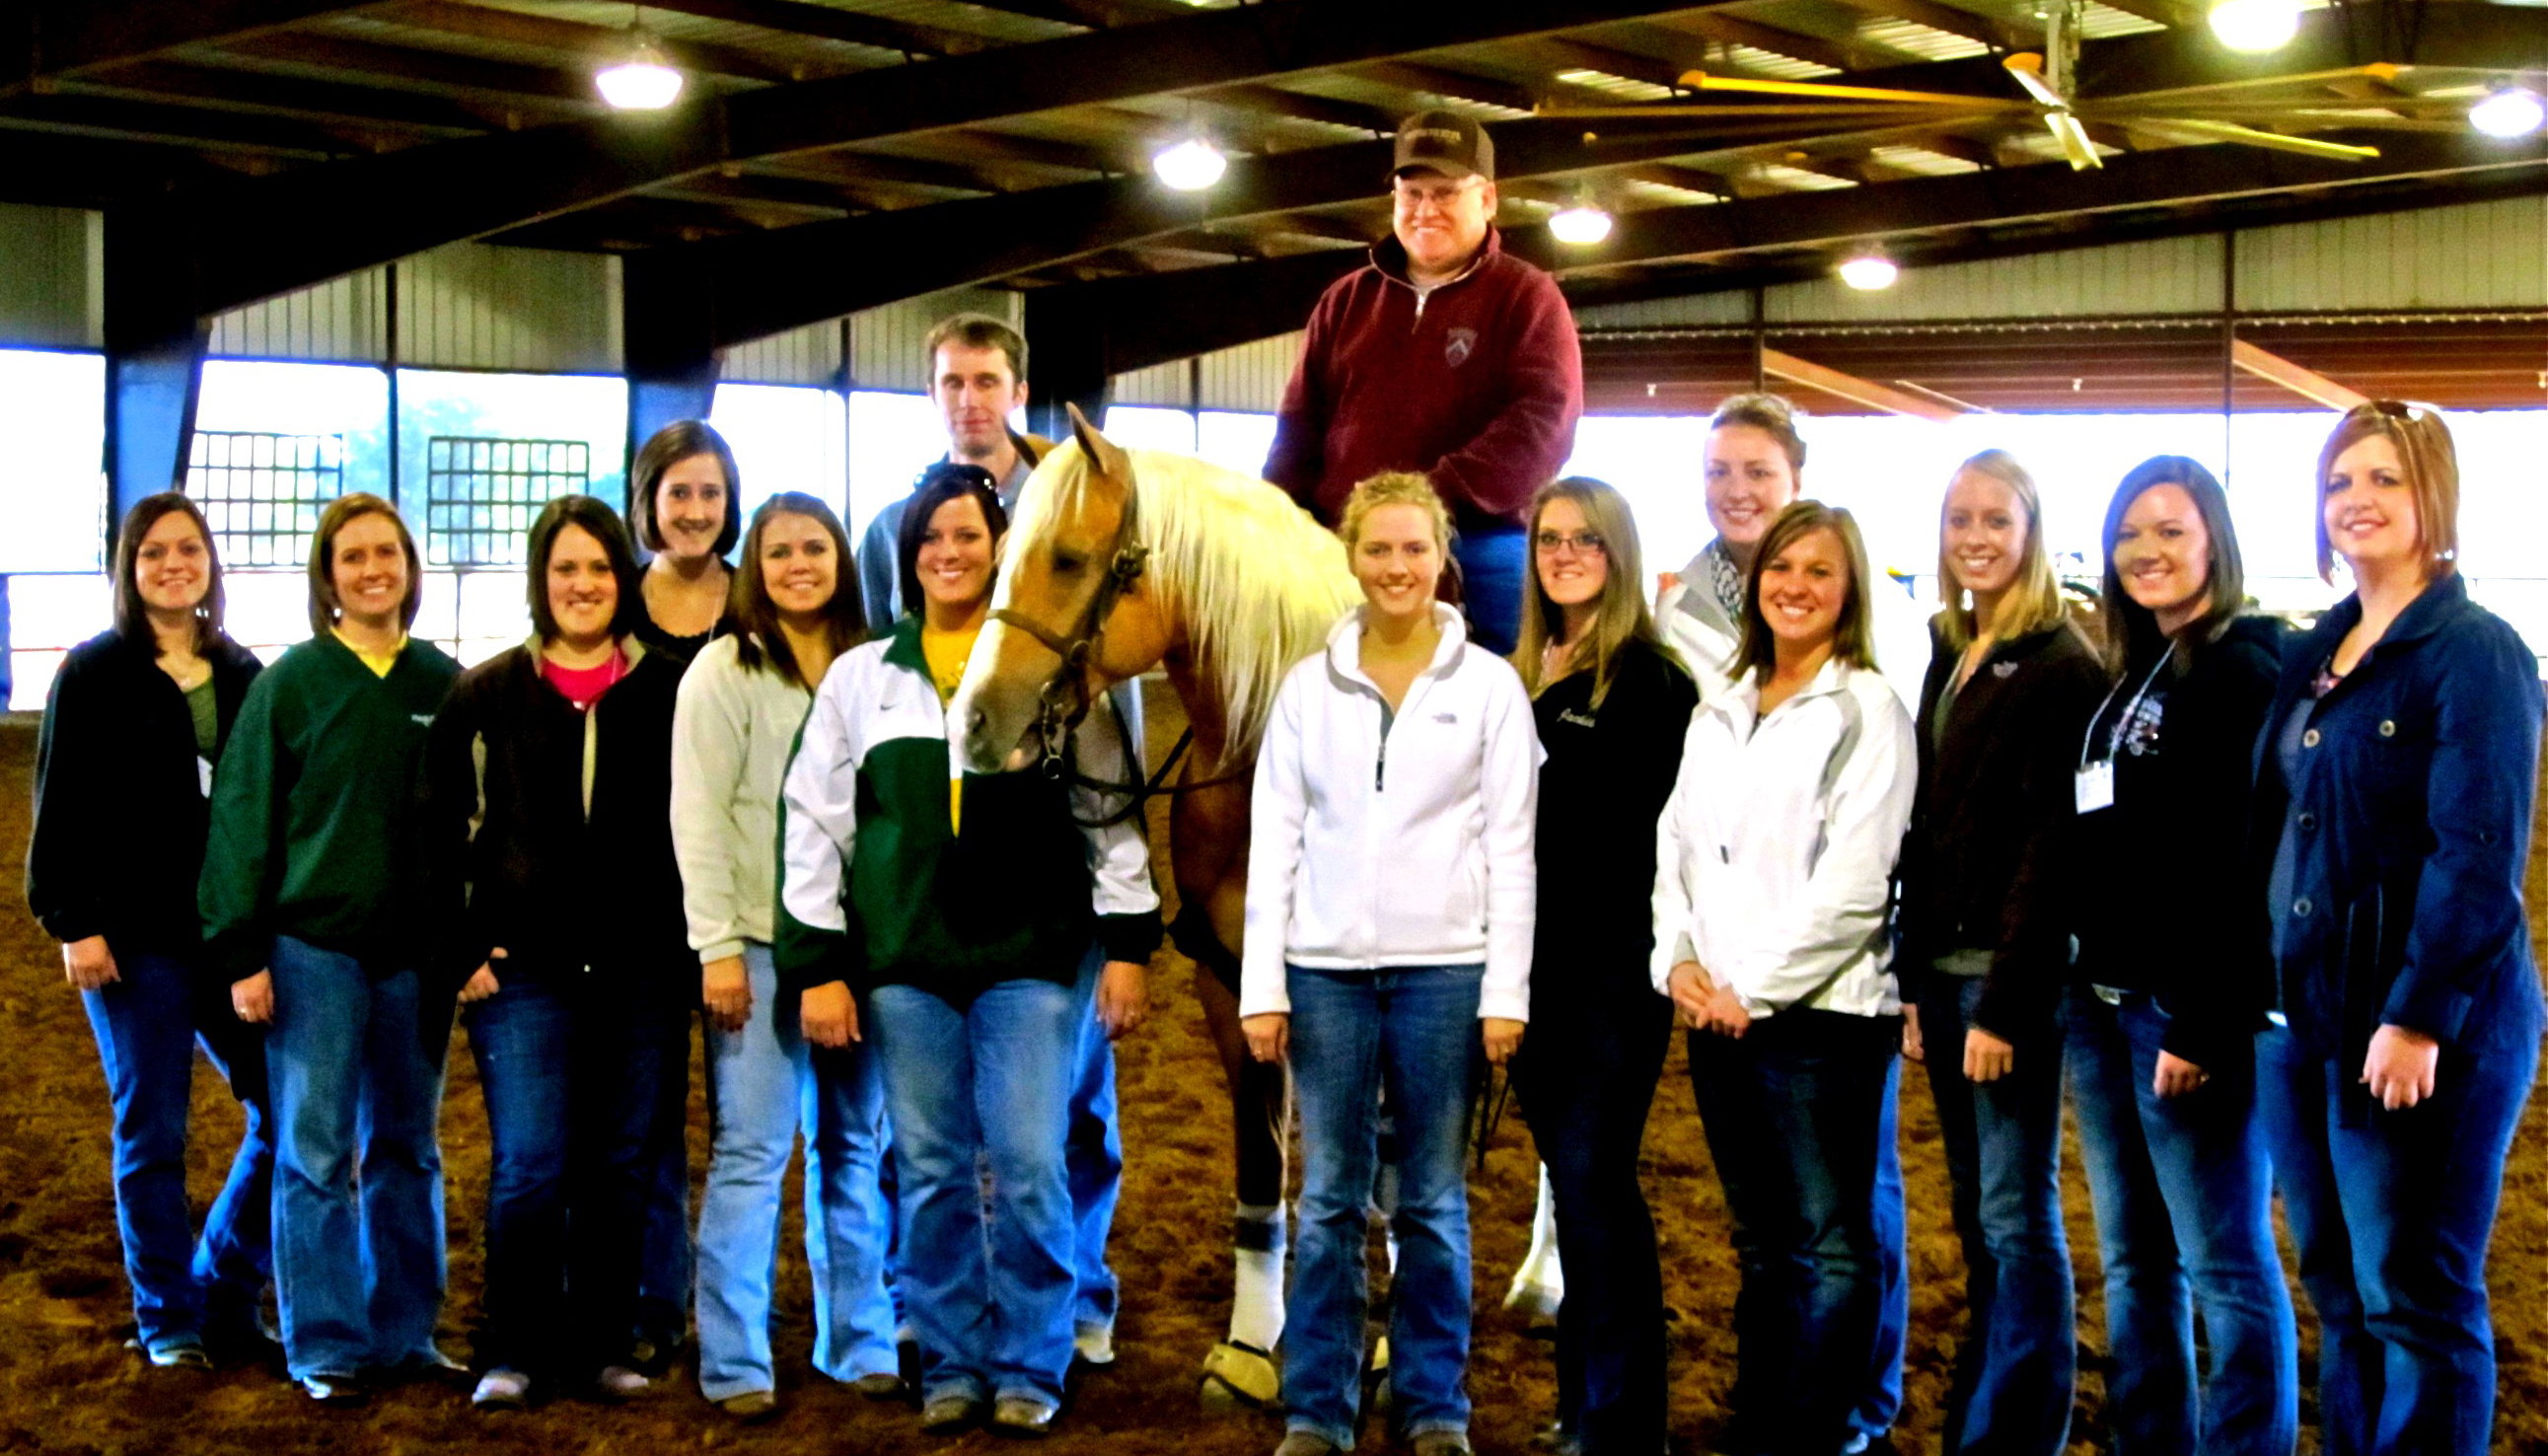 NDSU's Collegiate Horsemen's Association visits McQuay Stables during the American Collegiate Horsemen's Association convention in Fort Worth, Texas. Pictured are (from left to right; all are club members unless otherwise noted) back row: Amanda Grev, David Anderson, stable owner Tim McQuay and Jenna Benjaminson; front row: Shannon Voges, adviser Carrie Hammer, Citty Cole, Brittany Huggins, Catie Vieths, Janessa Thompson, Jackie Eldredge, Janelle Lanoue, Kelly O'Connell, Codie Miller and adviser Tara Swanson.